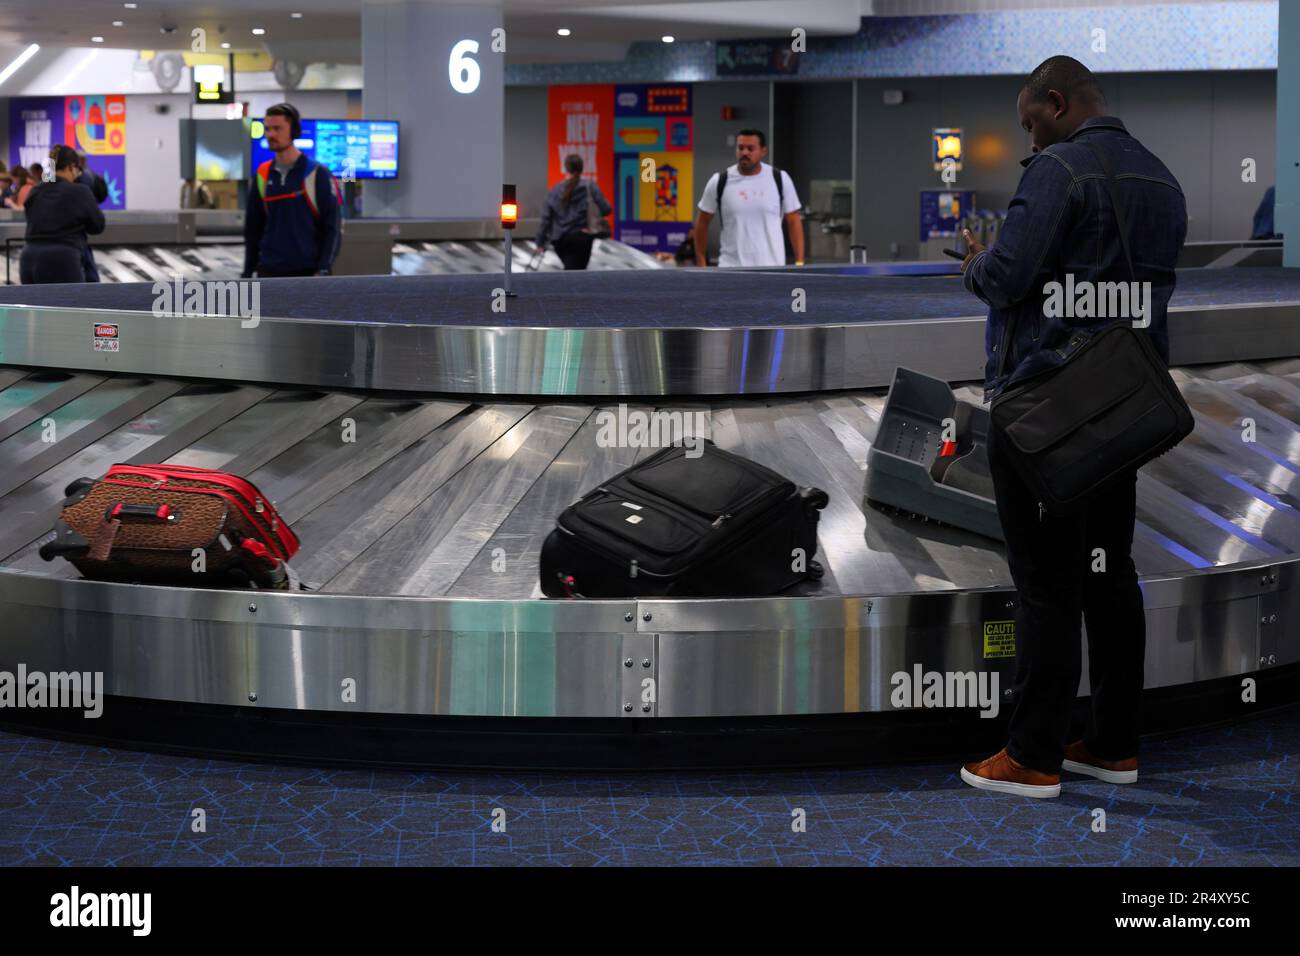 People waiting to pick up luggage from a baggage carousel at LaGuardia Airport Terminal B baggage claim area, New York City. Stock Photo